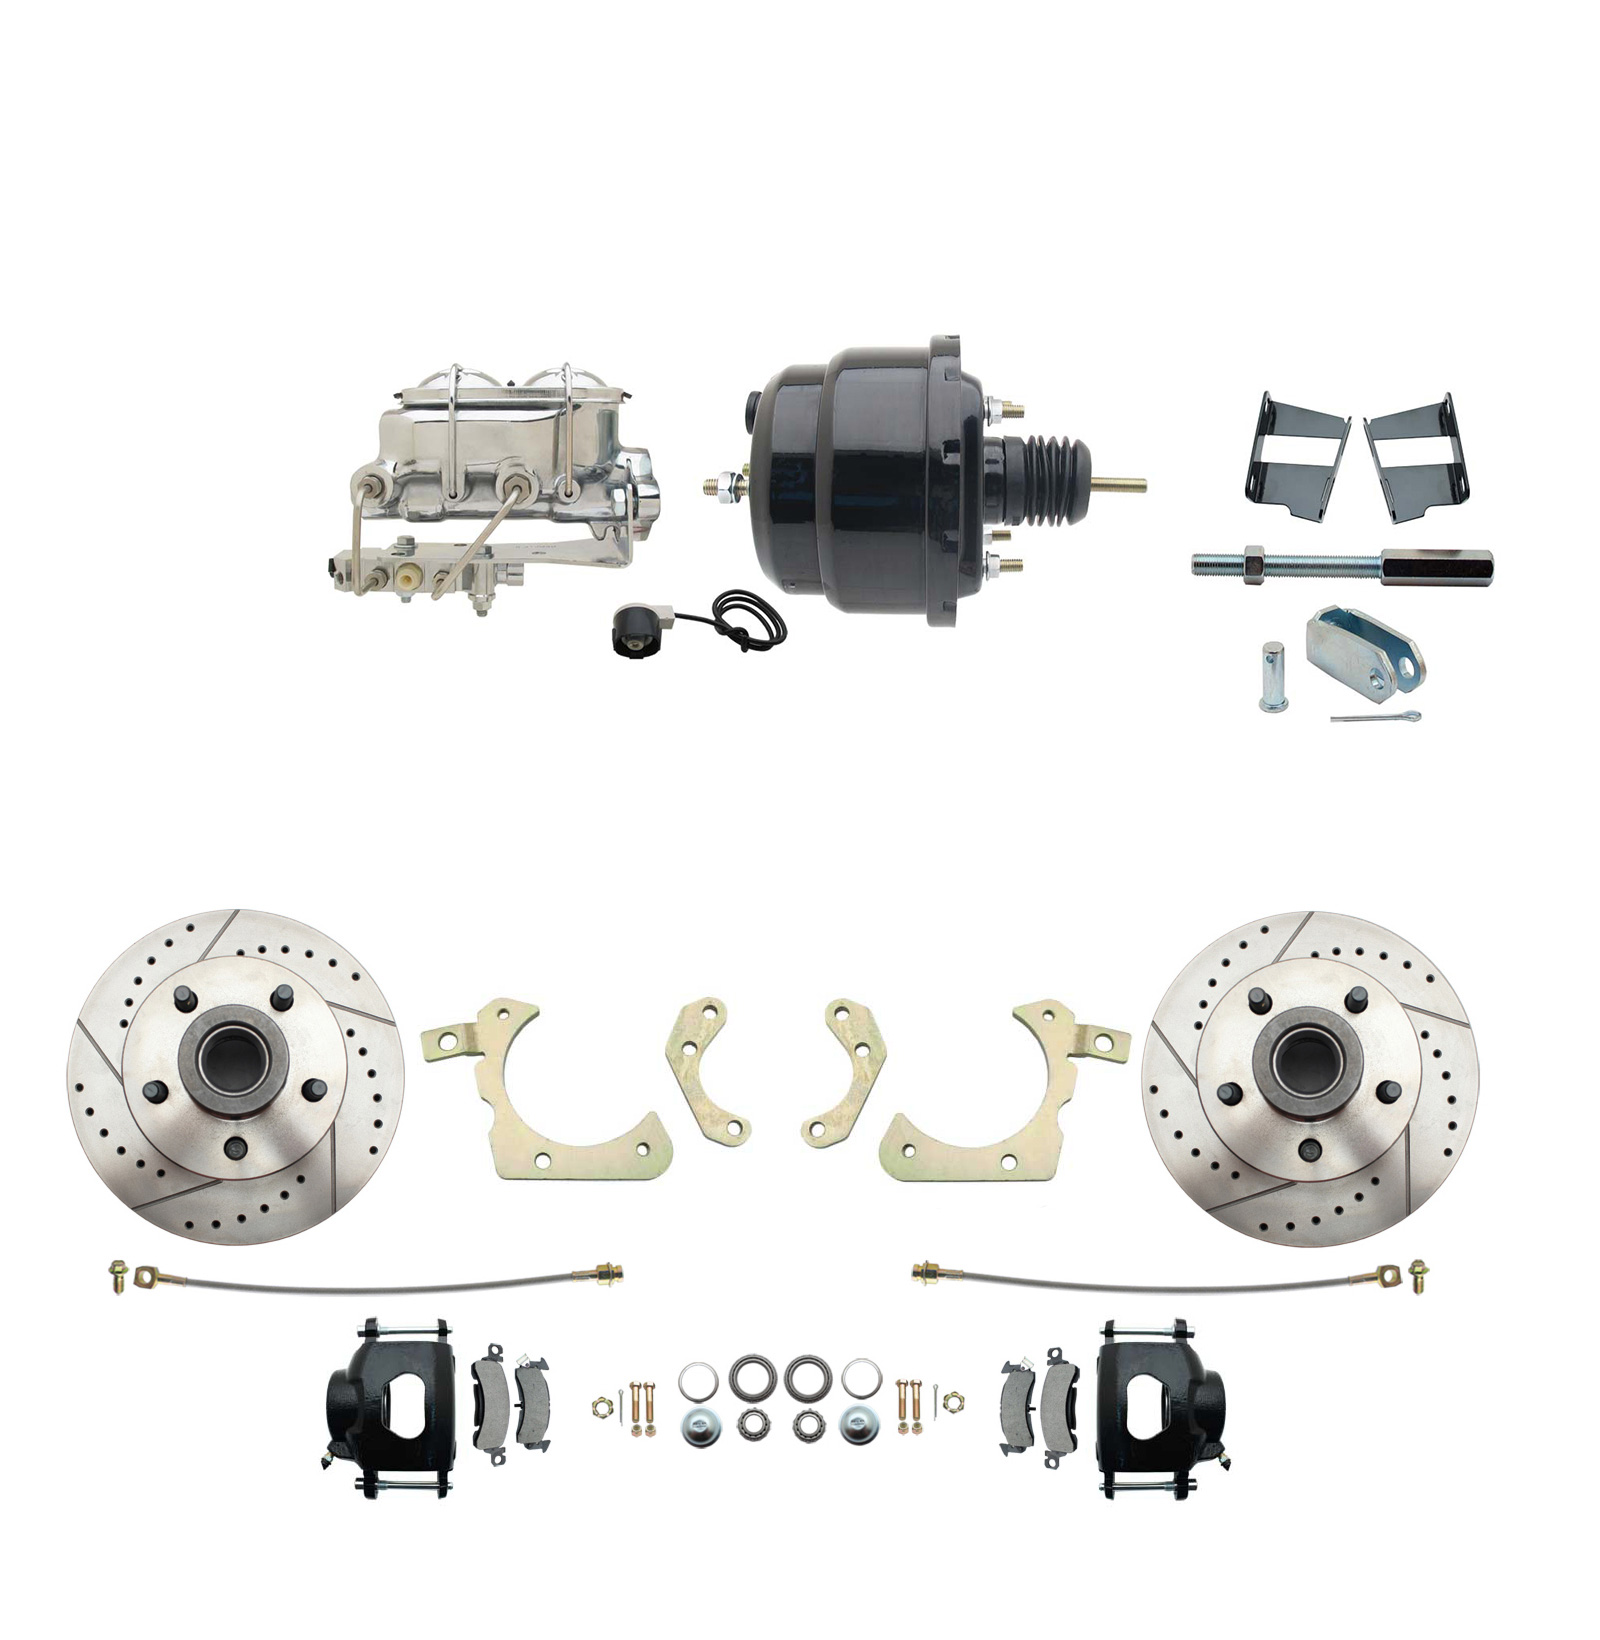 1959-1964 GM Full Size Front Disc Brake Kit Black Powder Coated Calipers Drilled/Slotted Rotors (Impala, Bel Air, Biscayne) & 8 Dual Powder Coated Black Booster Conversion Kit W/ Chrome Master Cylinder Bottom Mount Disc/ Drum